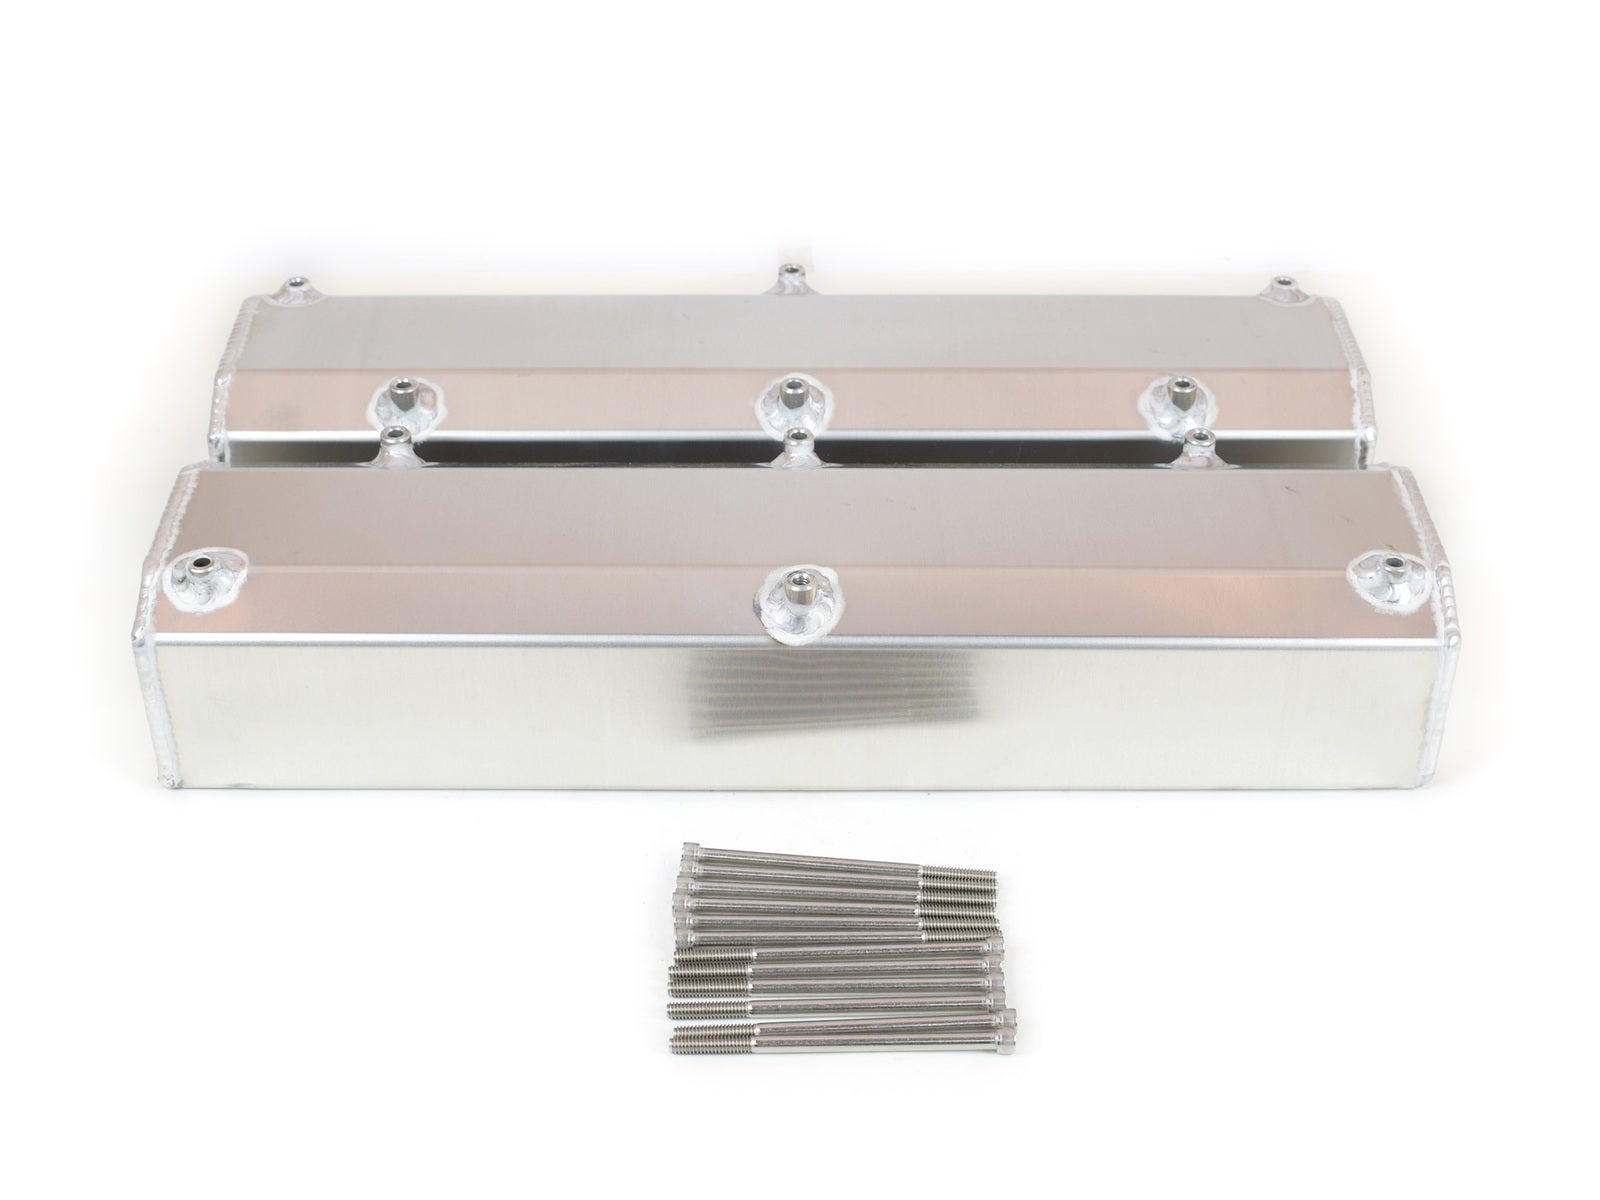 Canton Fabricated Aluminum Valve Cover For 302/351W Ford Small Block Ford Mustang 1981 CN65300